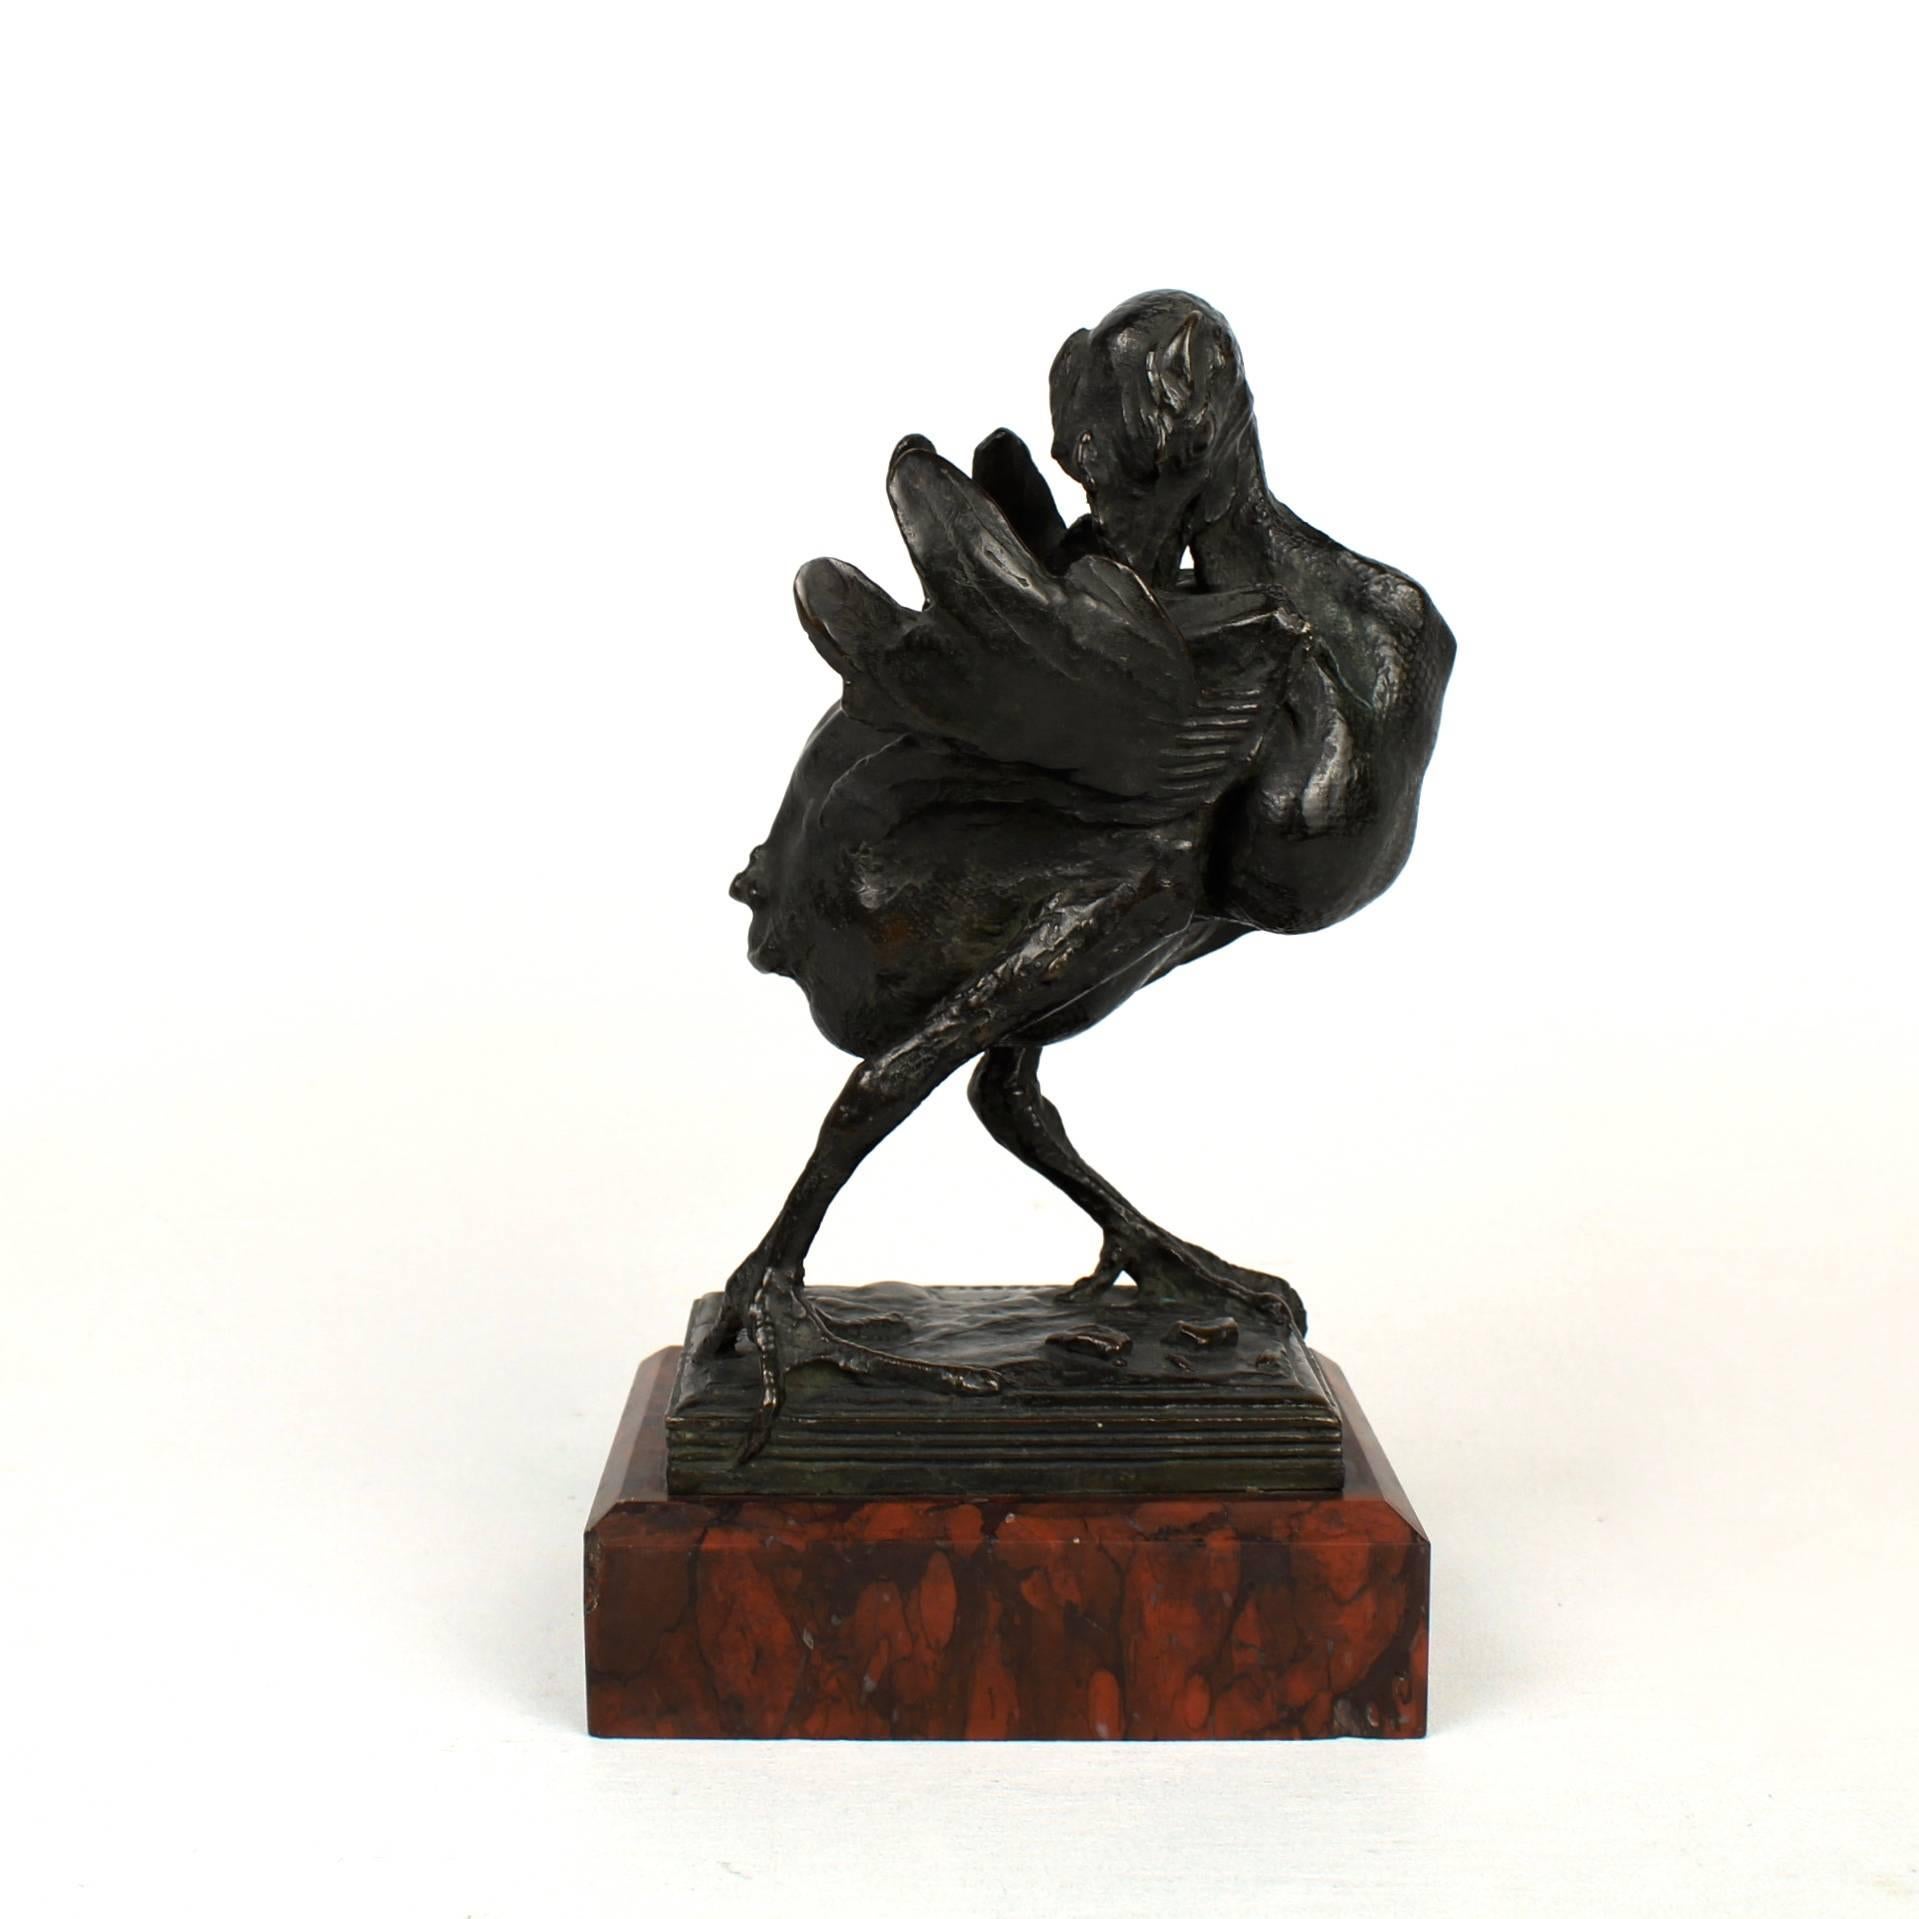 A rare model of what we believe is an adolescent turkey by the important American Animalier Sculptor, Albert Laessle. 
 
The dynamically modeled young bird is straining to scratch its back with wings outstretched and legs splayed slightly in